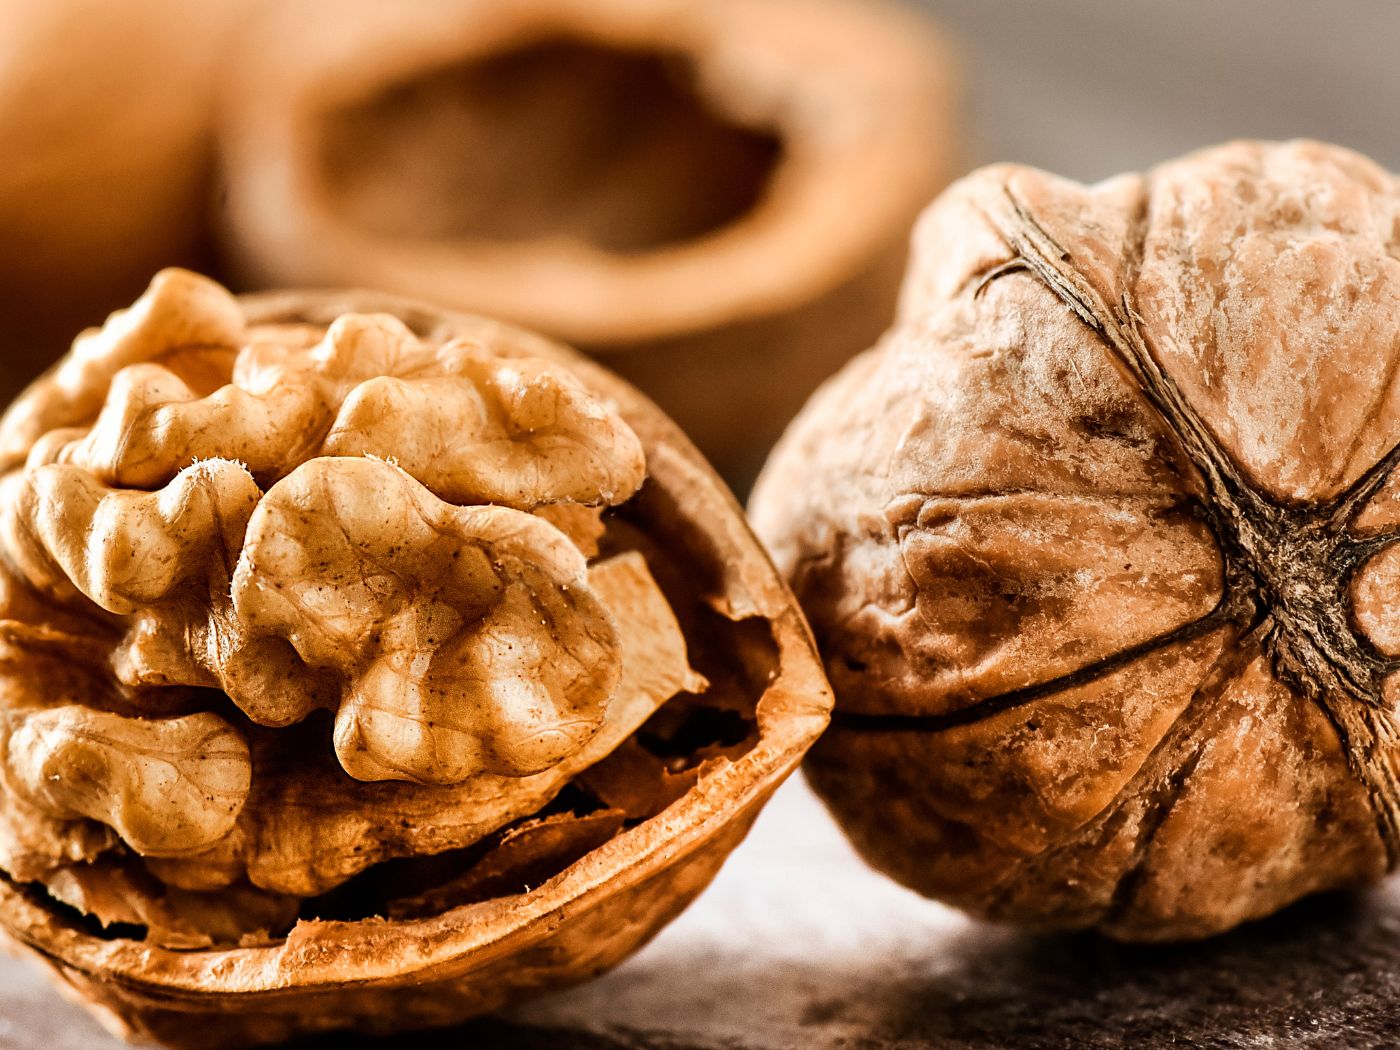 Walnuts: Health Benefits, Nutrition, Side Effects & More - Fittify